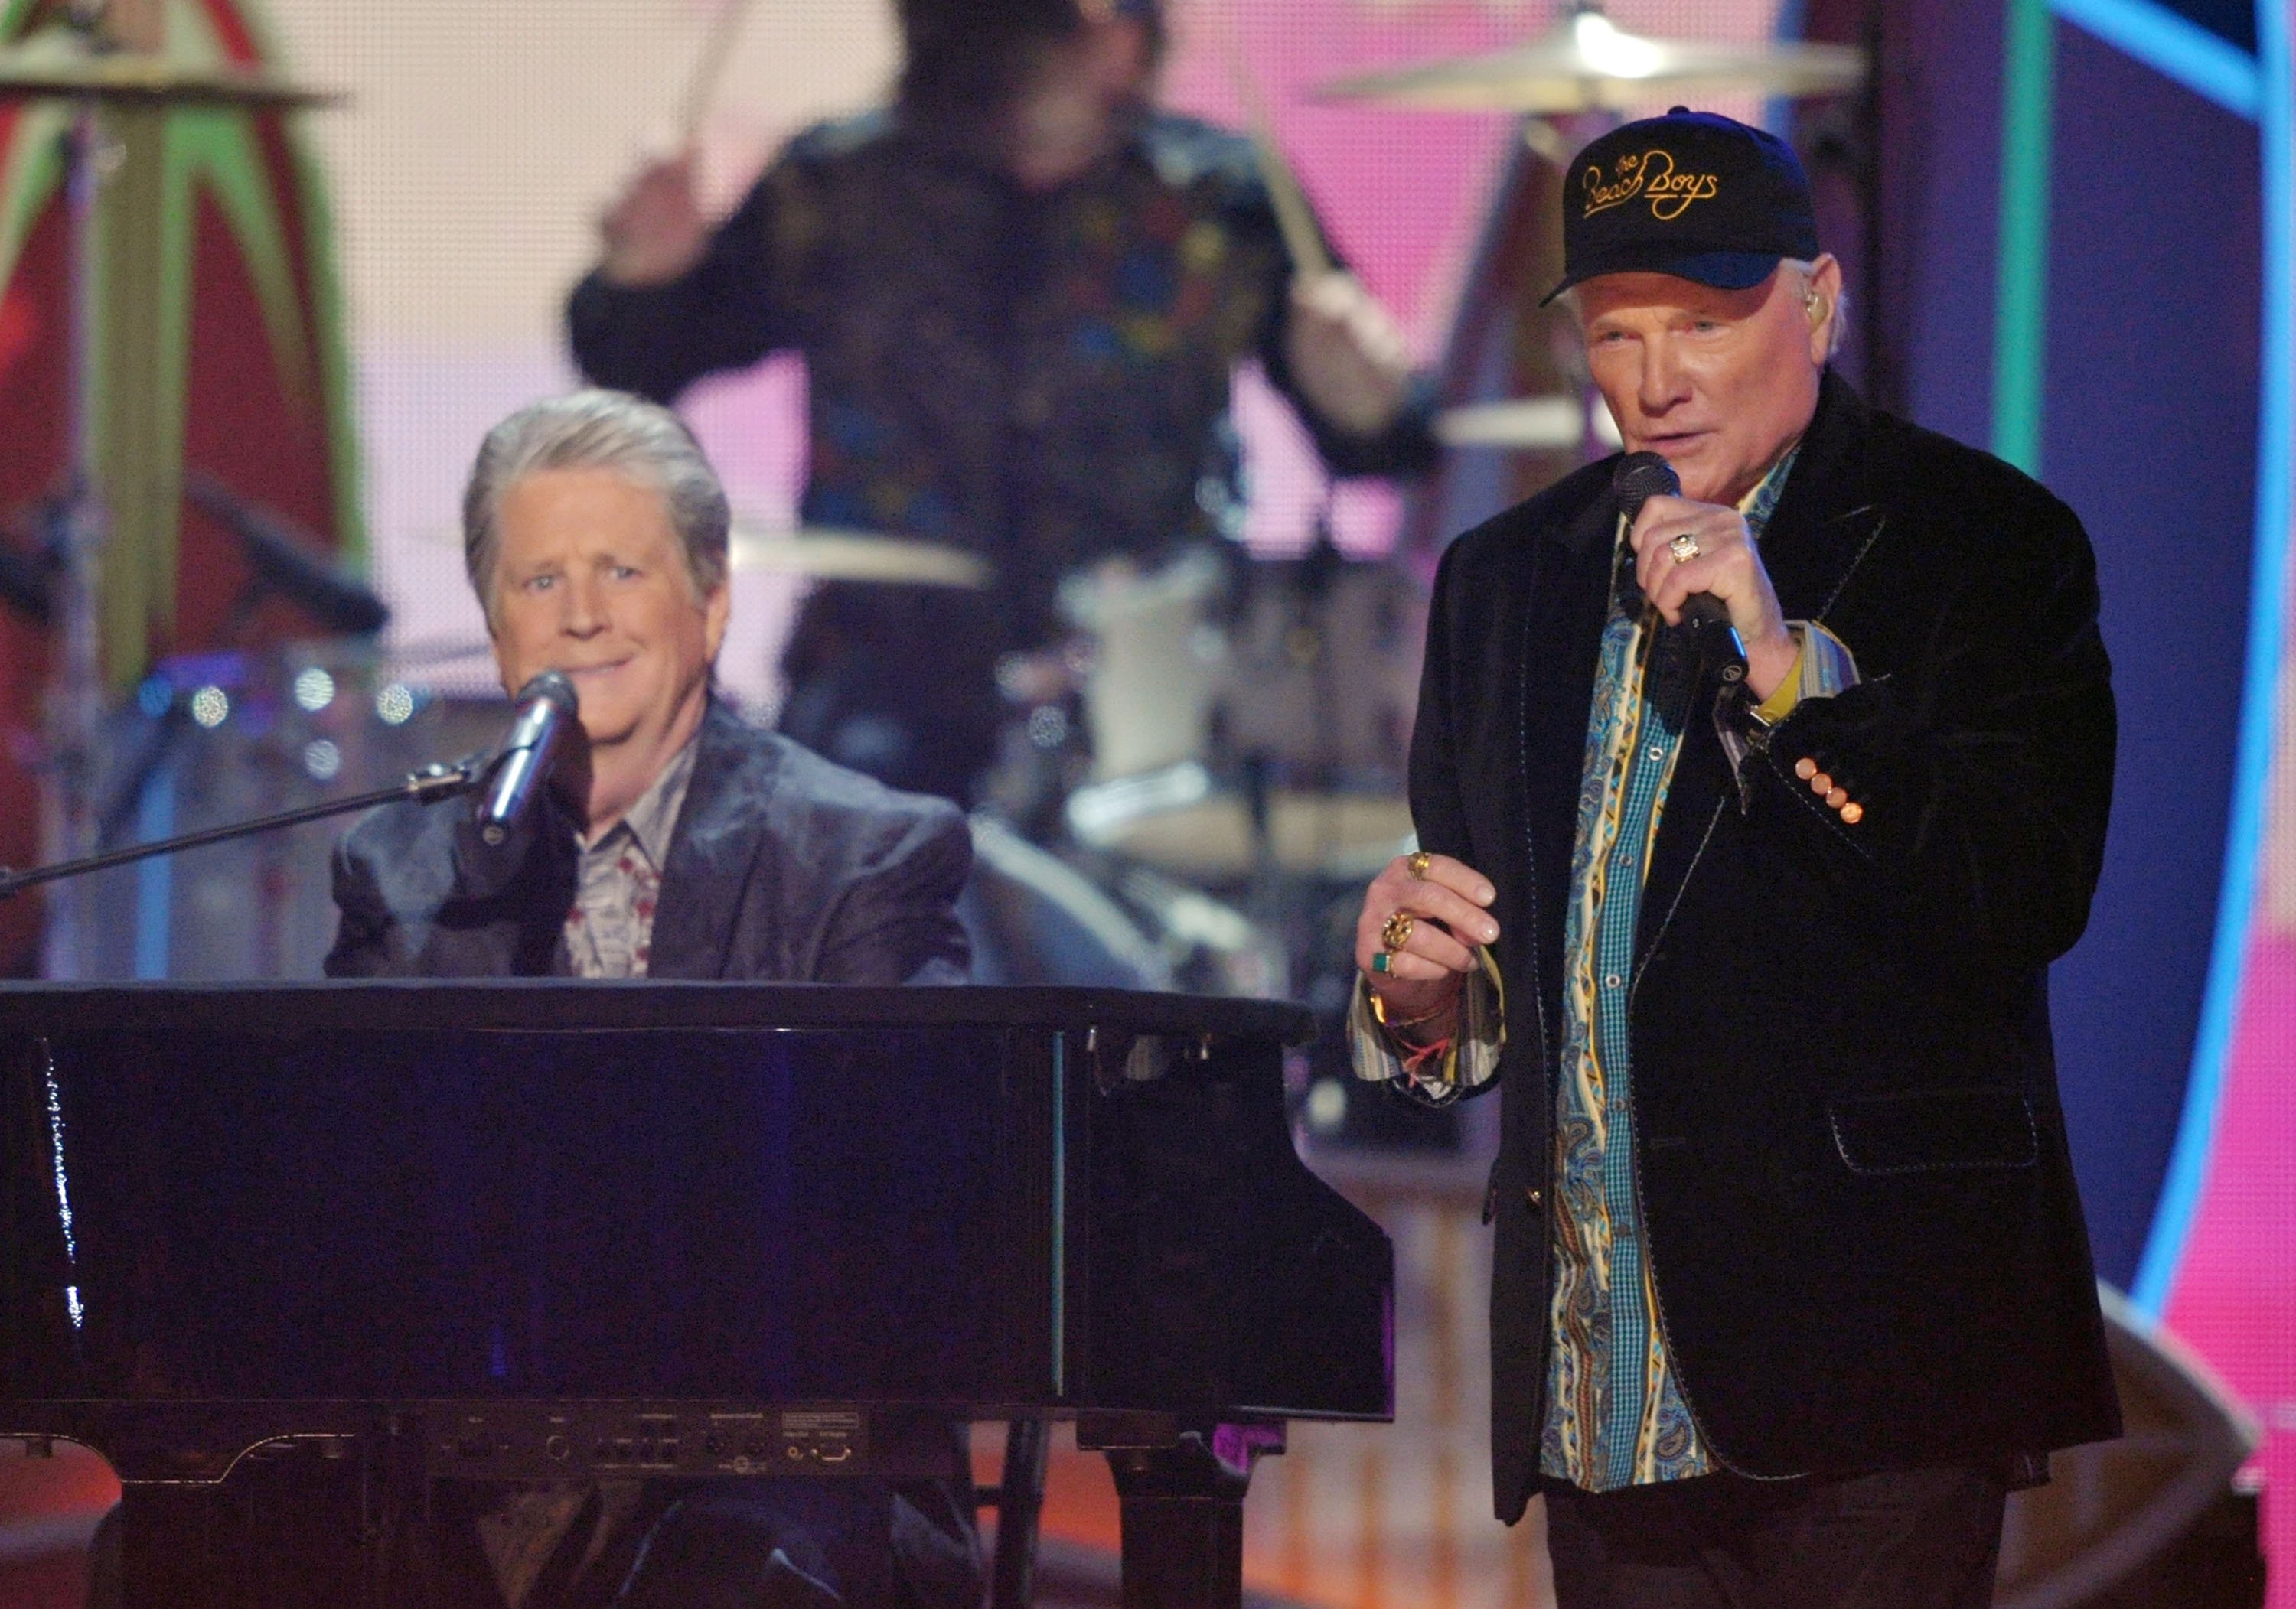 Musicians Brian Wilson and Mike Love of The Beach Boys perform at the 54th Annual GRAMMY Awards